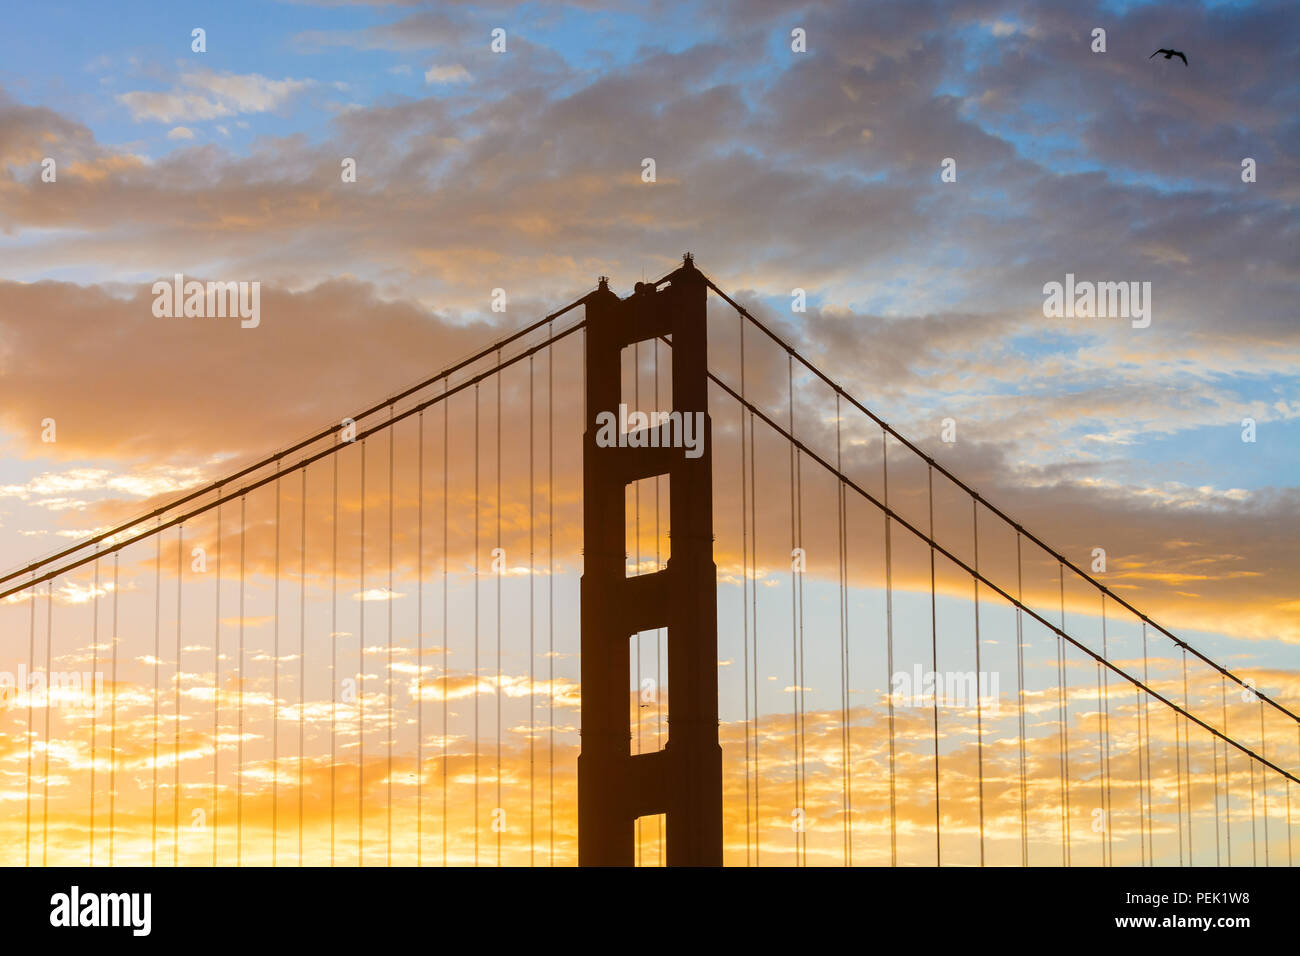 A colorful sunset begins to emerge behind one of the towers of the Golden Gate Bridge in San Francisco, CA. Stock Photo